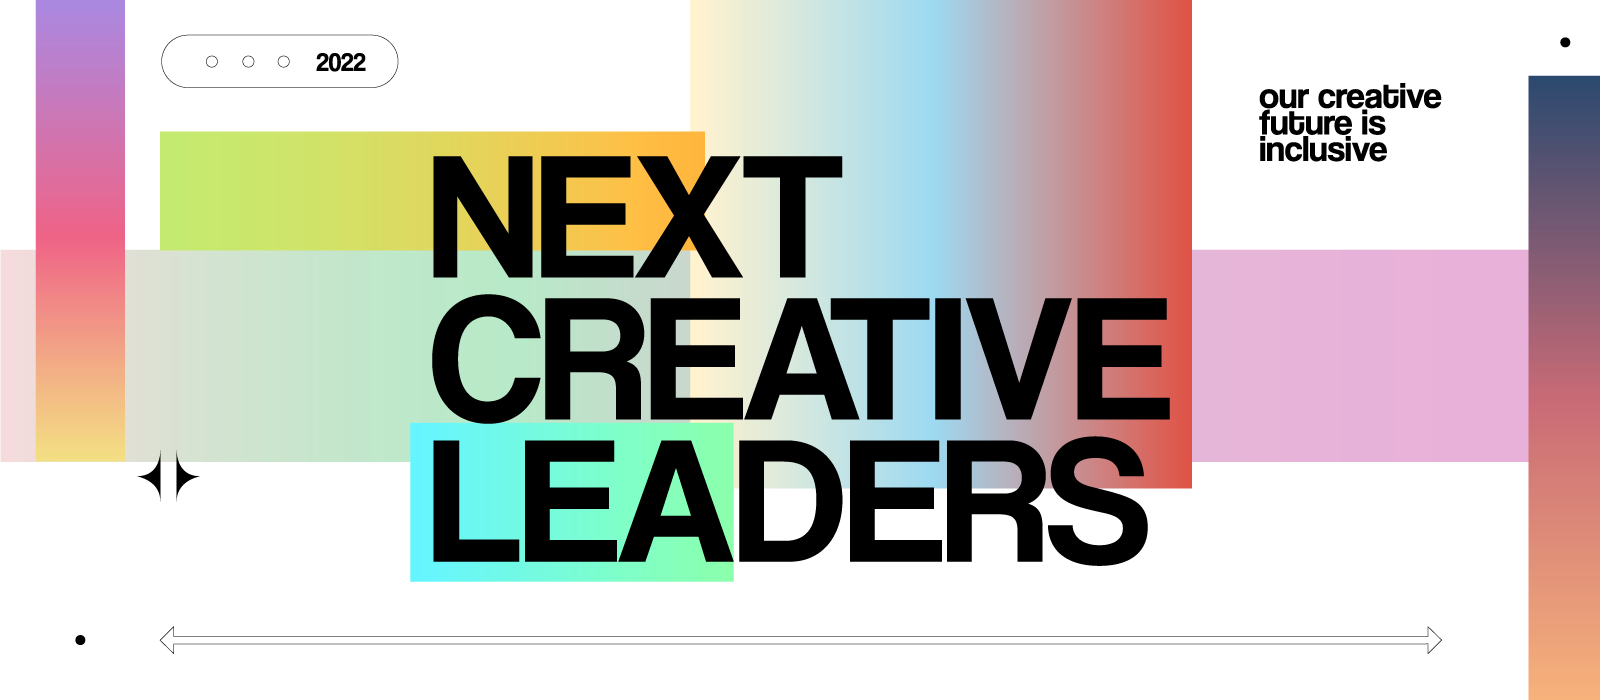 The Next Creative Leaders